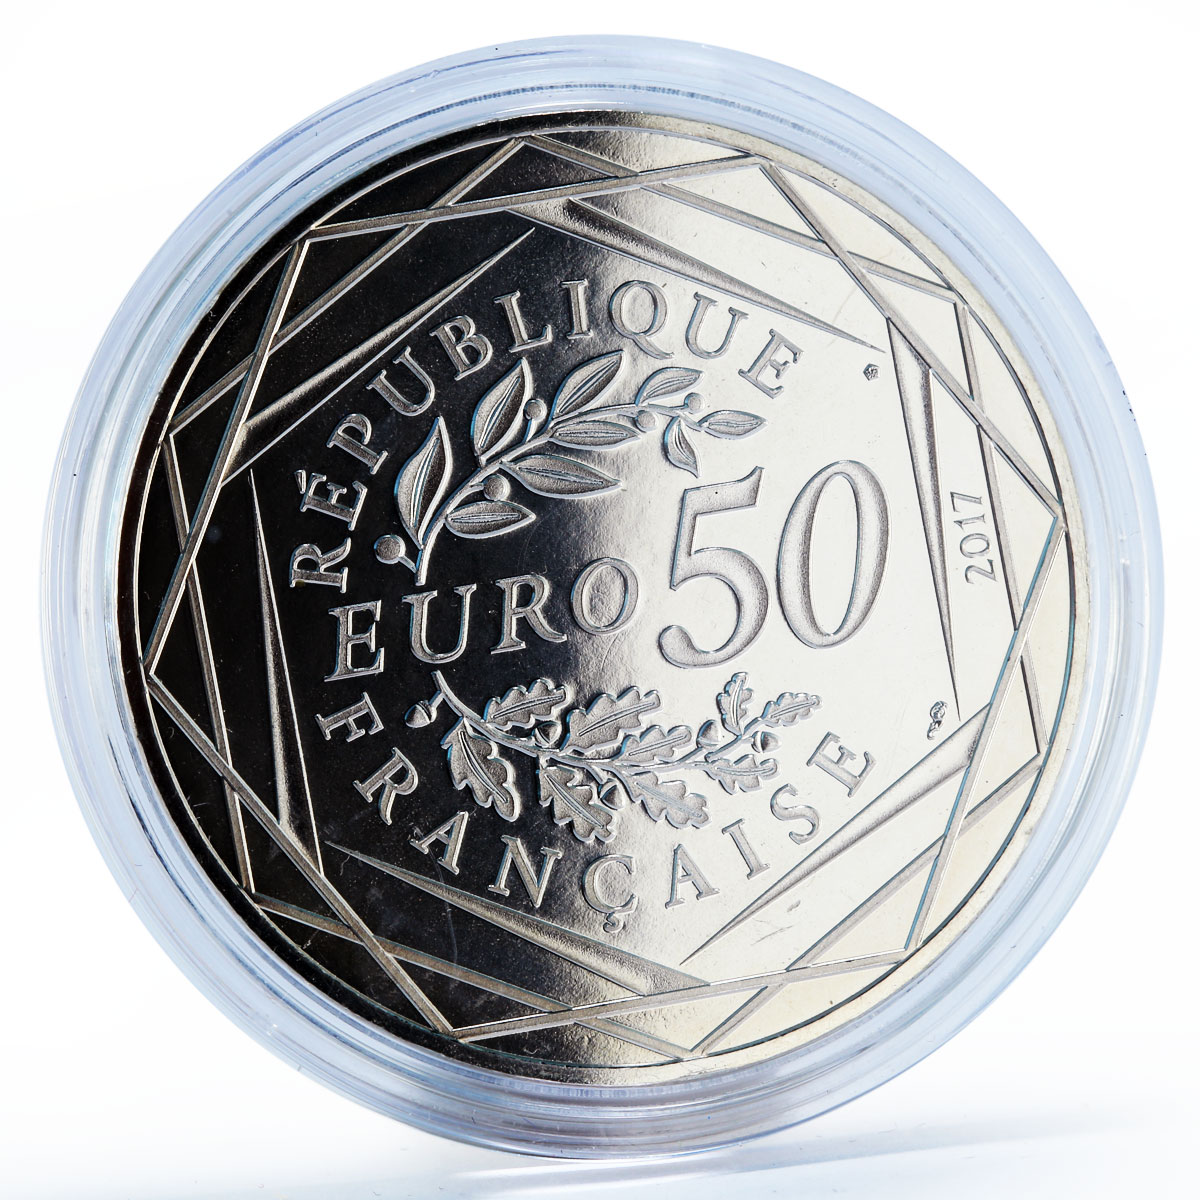 France 50 euro Jean-Paul Gaultier Coq Mariniere proof silver coin 2017